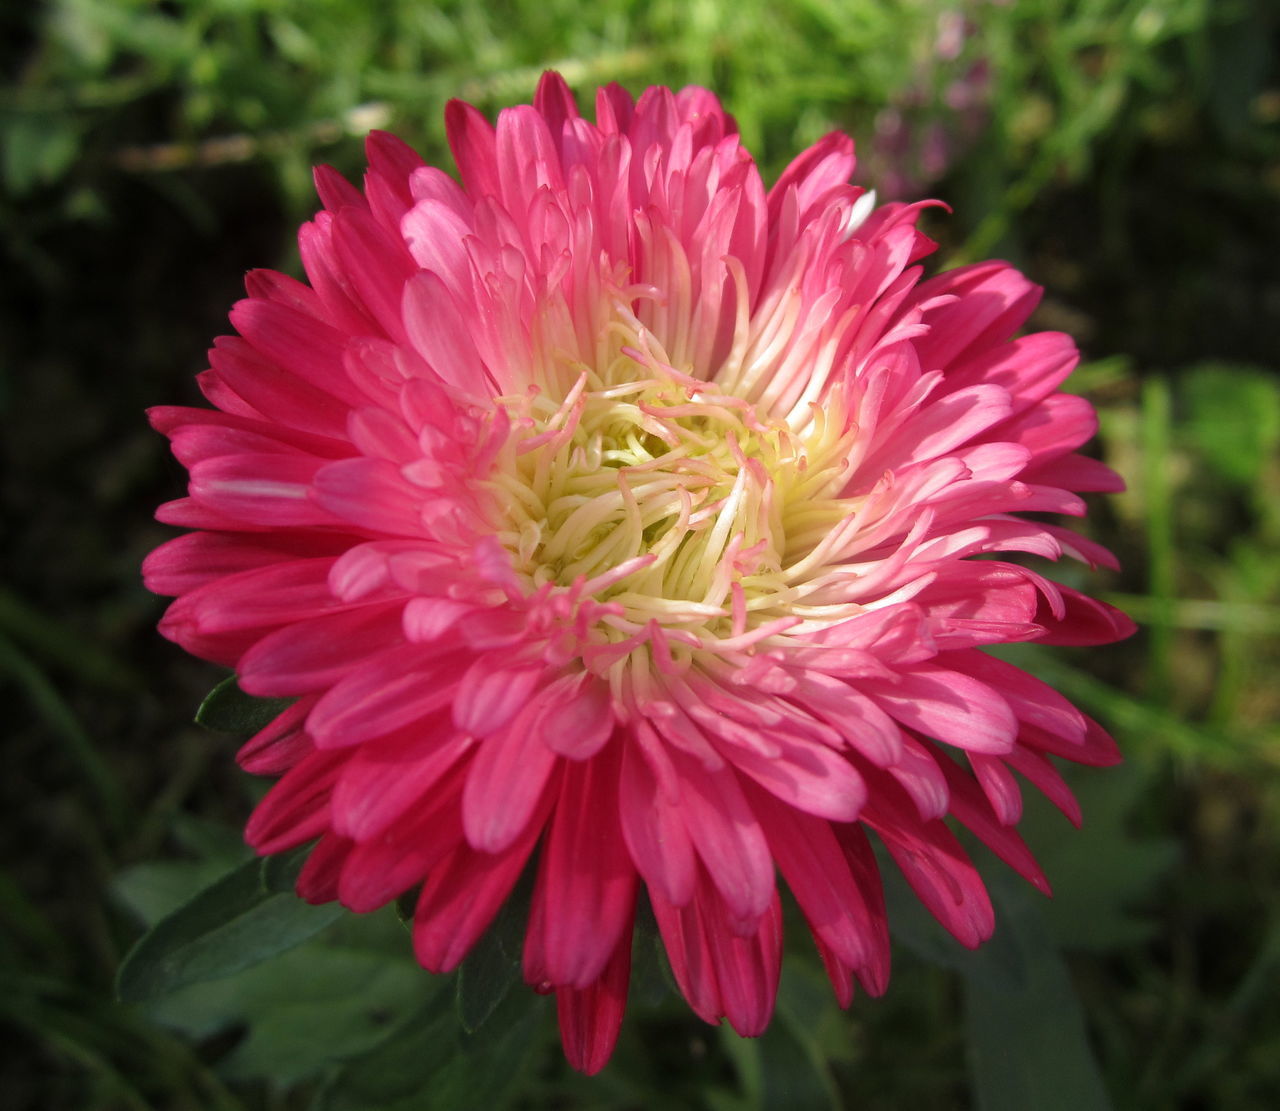 flower, flowering plant, plant, beauty in nature, freshness, petal, flower head, close-up, pink, inflorescence, fragility, nature, growth, dahlia, focus on foreground, no people, outdoors, asterales, pollen, springtime, day